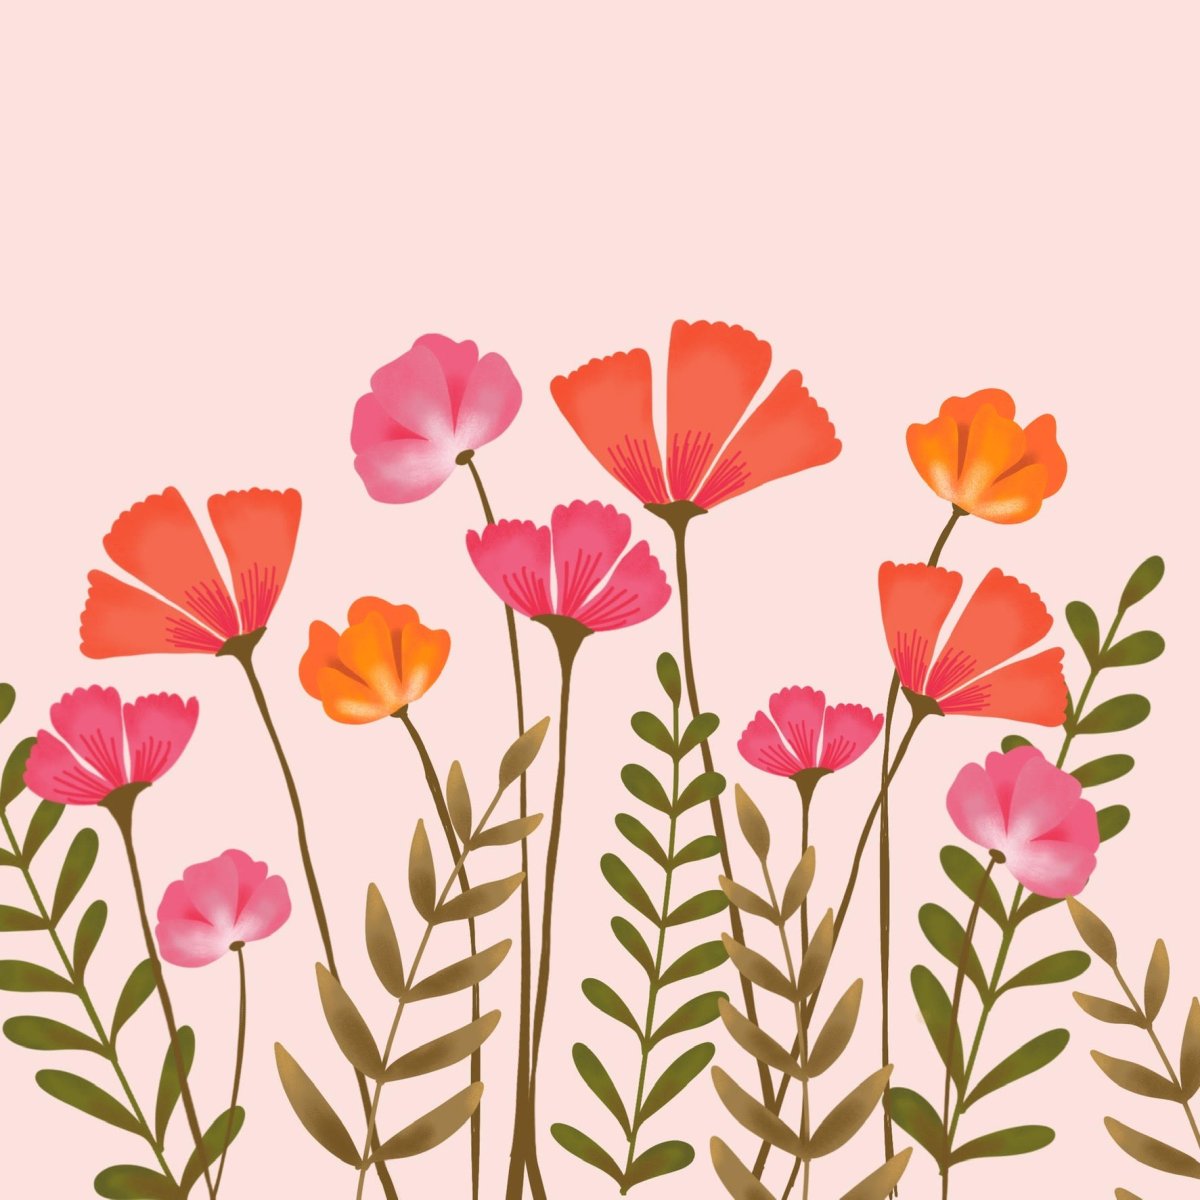 Image consists of digitally drawn flowers in shades of pink and orange, mixed with green and brown leafy vines on a blush background.